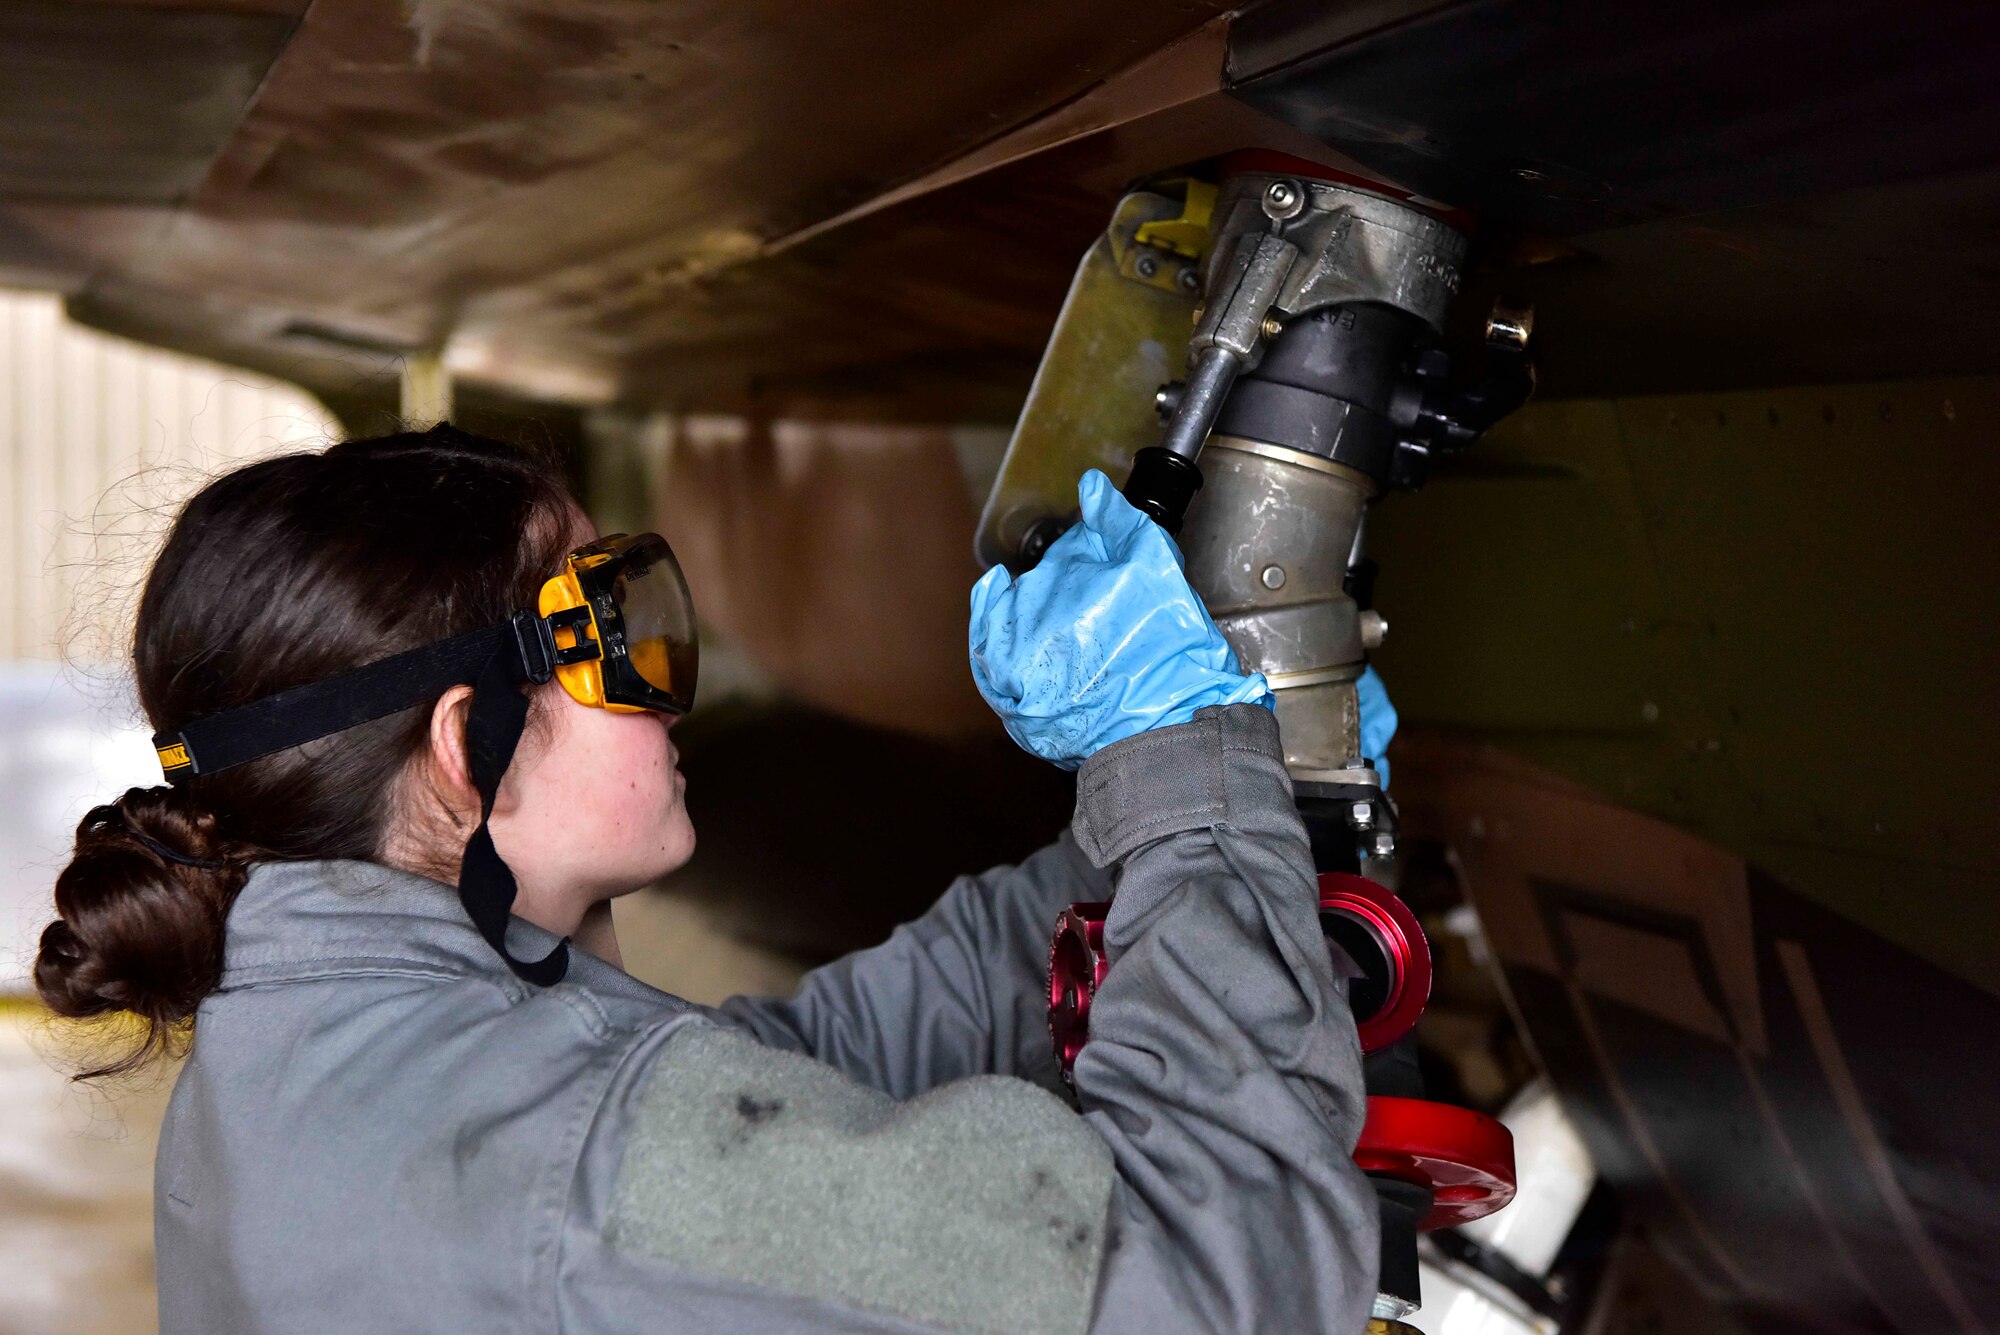 Airman 1st Class Angelia Fisher, a 354th Aircraft Maintenance Squadron crew chief, refuels an F-16 Fighting Falcon on Eielson Air Force Base, Alaska, March 24, 2020. Airmen from the 354th AMXS are following the Department of Defense policies for preventing the spread of COVID-19 while ensuring that the aircraft at Eielson are safe and ready to complete their mission. Policies include enforcing social distancing, good hygiene and personal care and sanitizing their work areas often. (U.S. Air Force photos by Senior Airman Beaux Hebert)